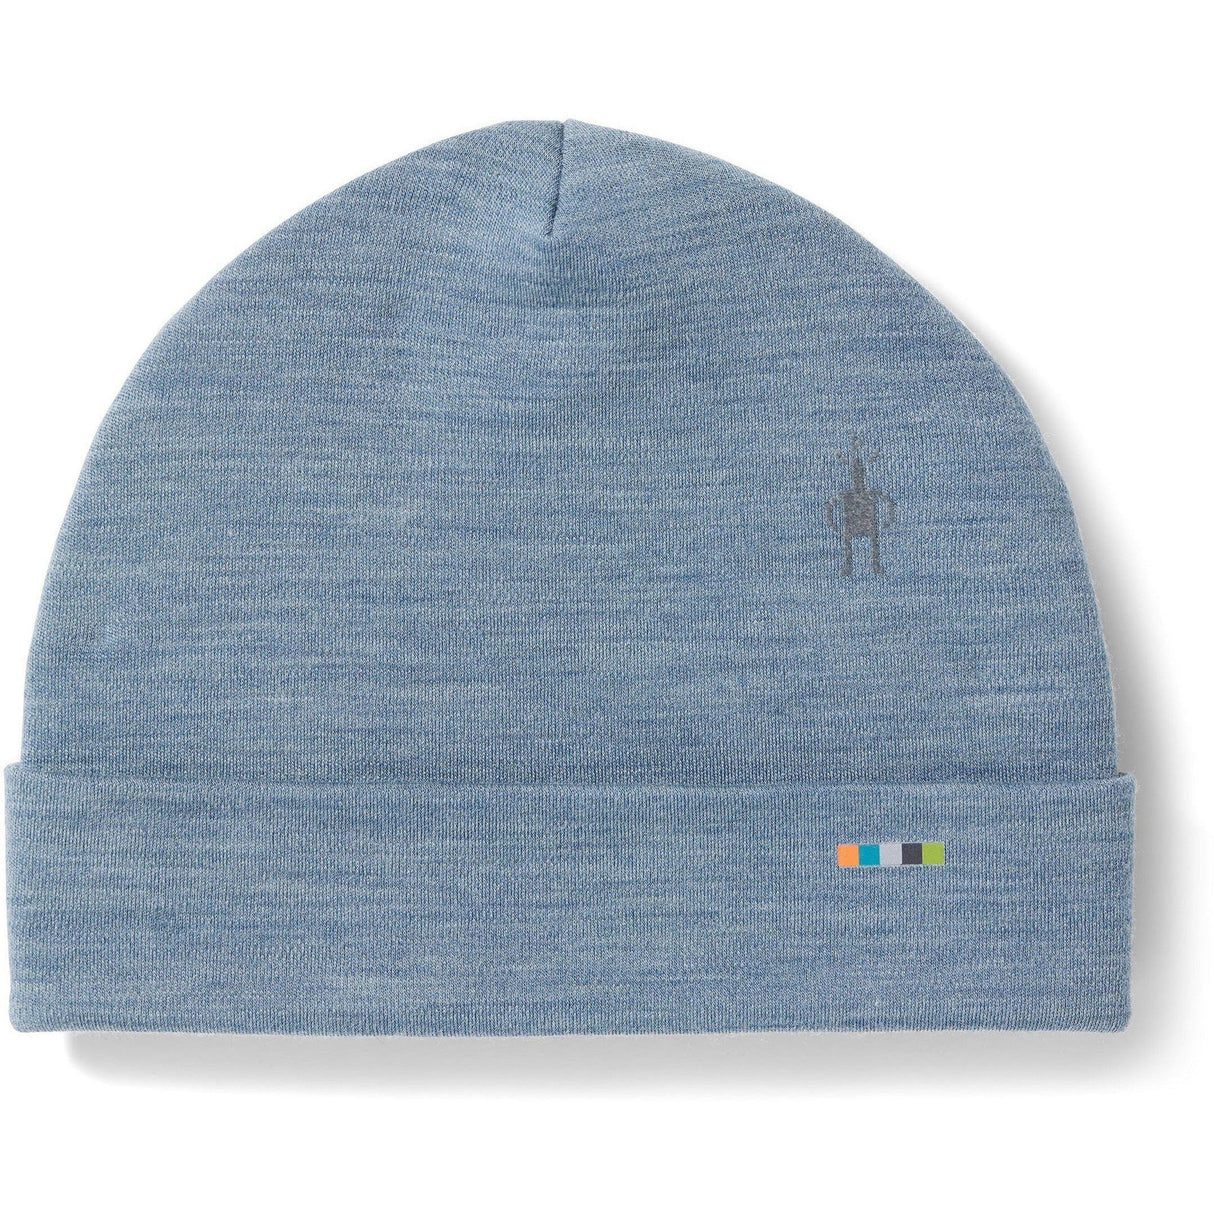 Smartwool Thermal Merino Reversible Cuffed Beanie  -  One Size Fits Most / Pewter Blue Heather